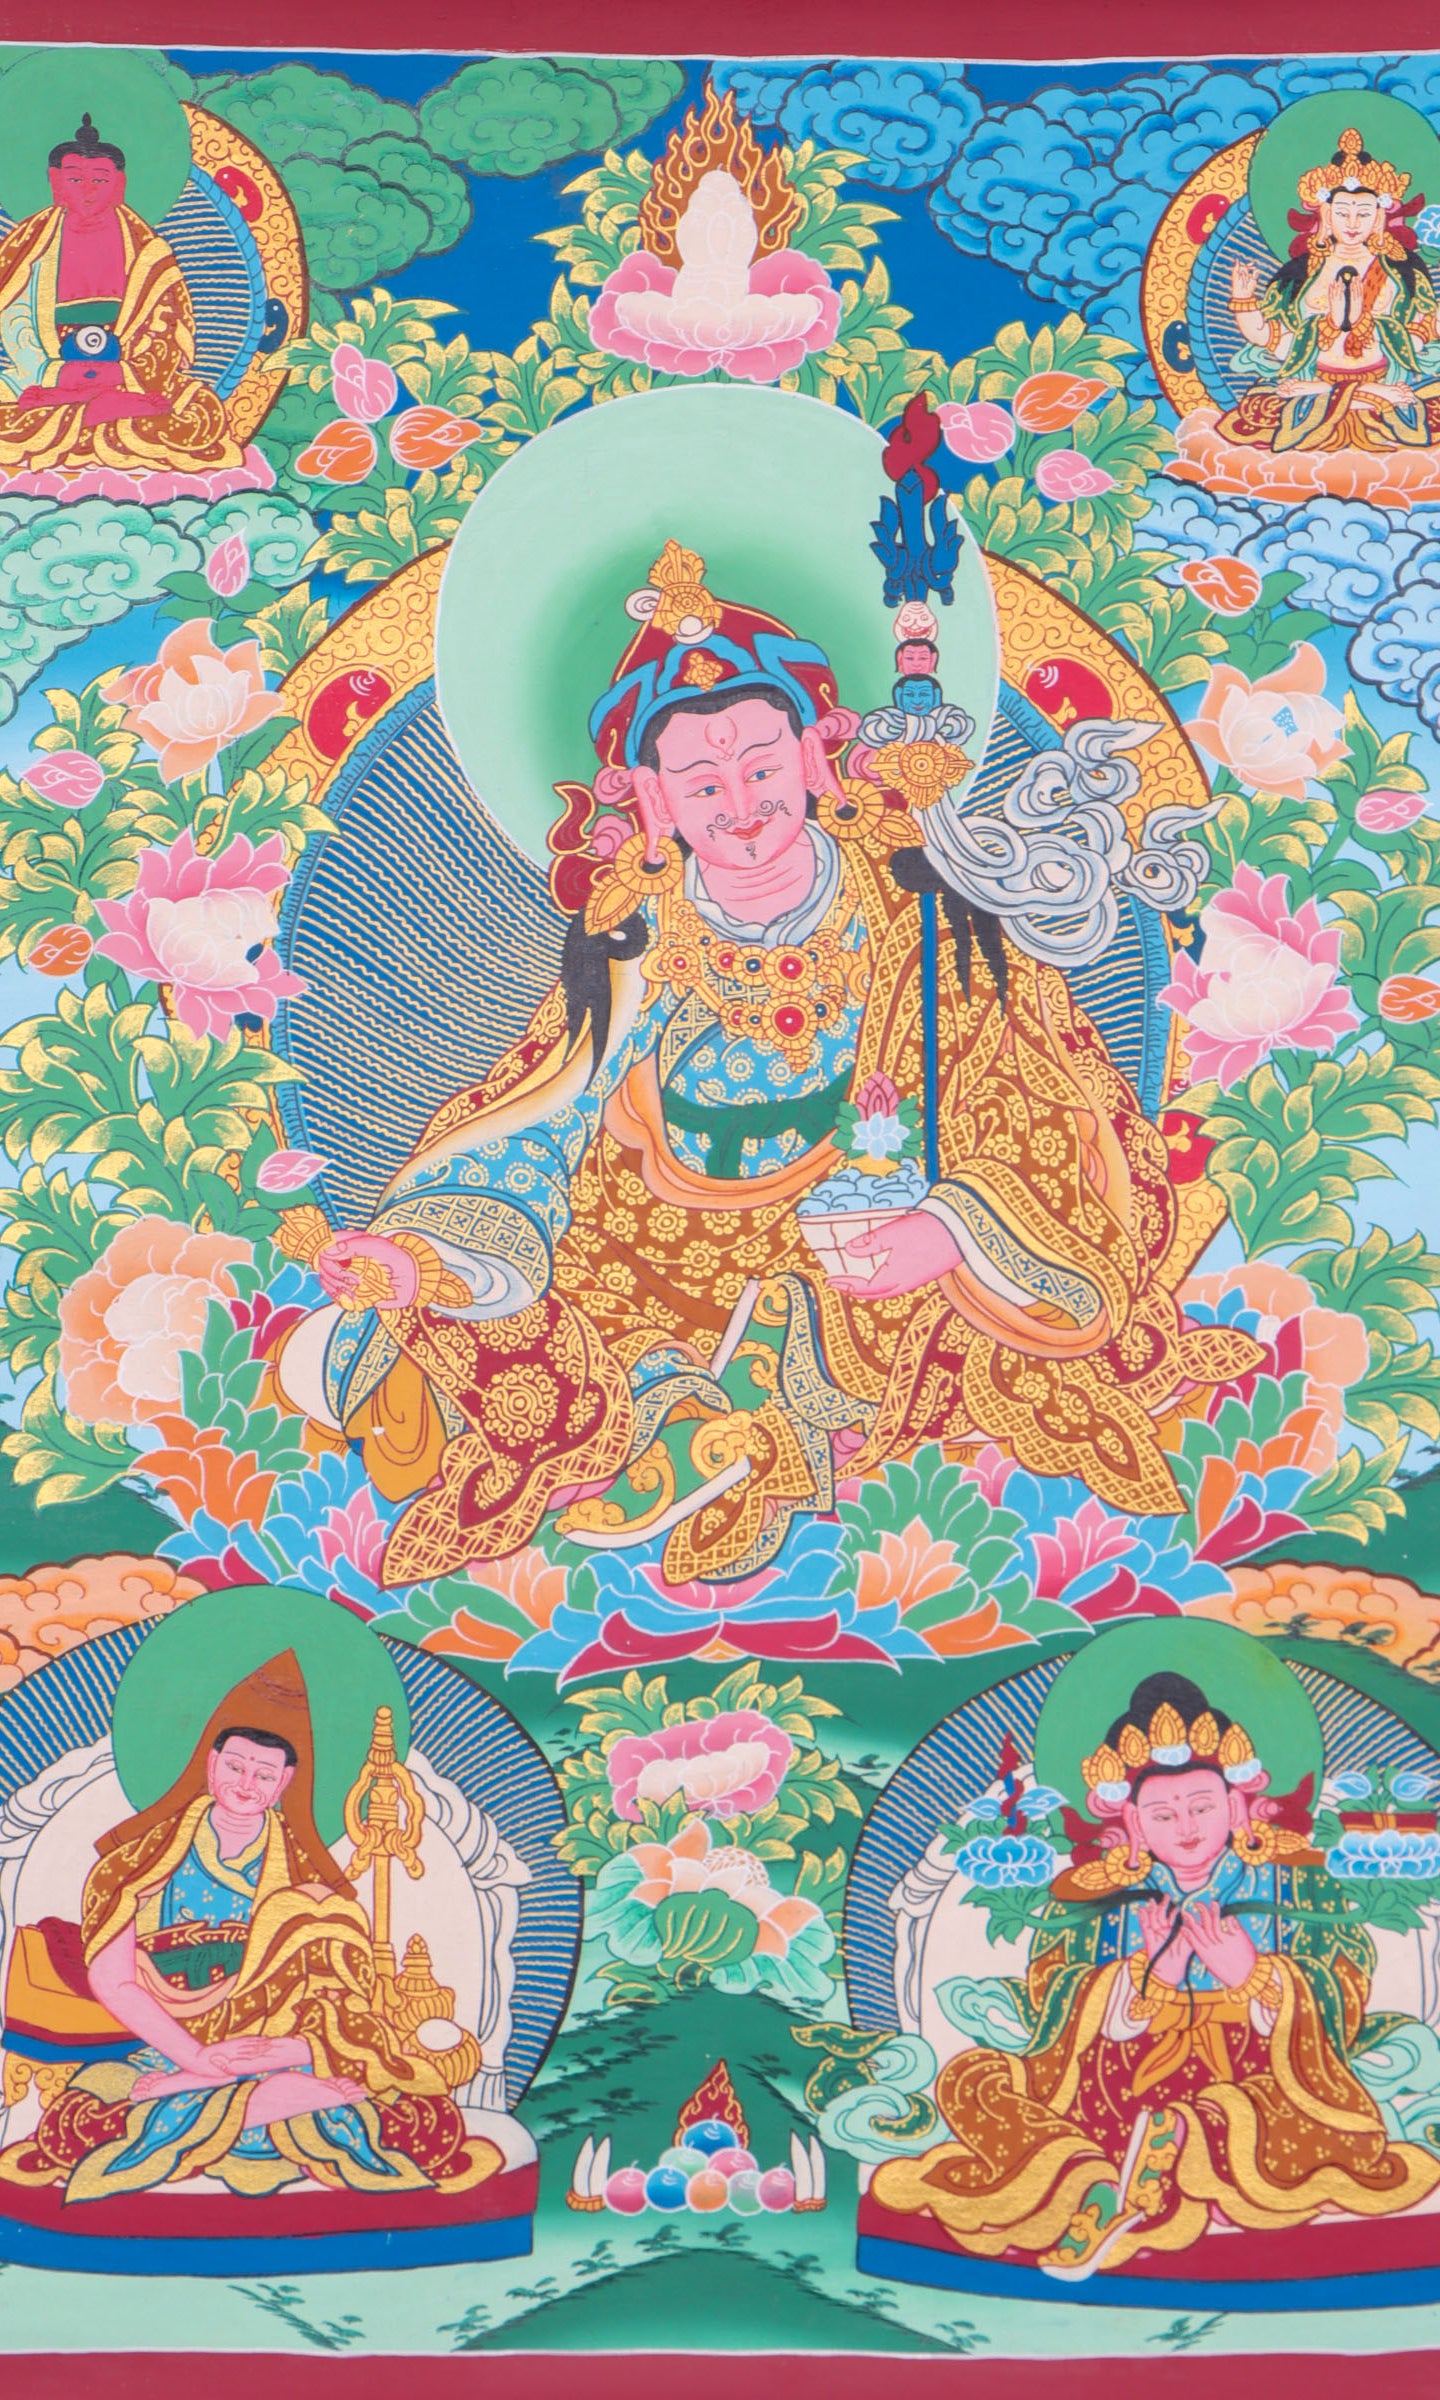 Guru Rinpoche Thangka helps to purify negative karma, and bring about inner peace and well-being. 